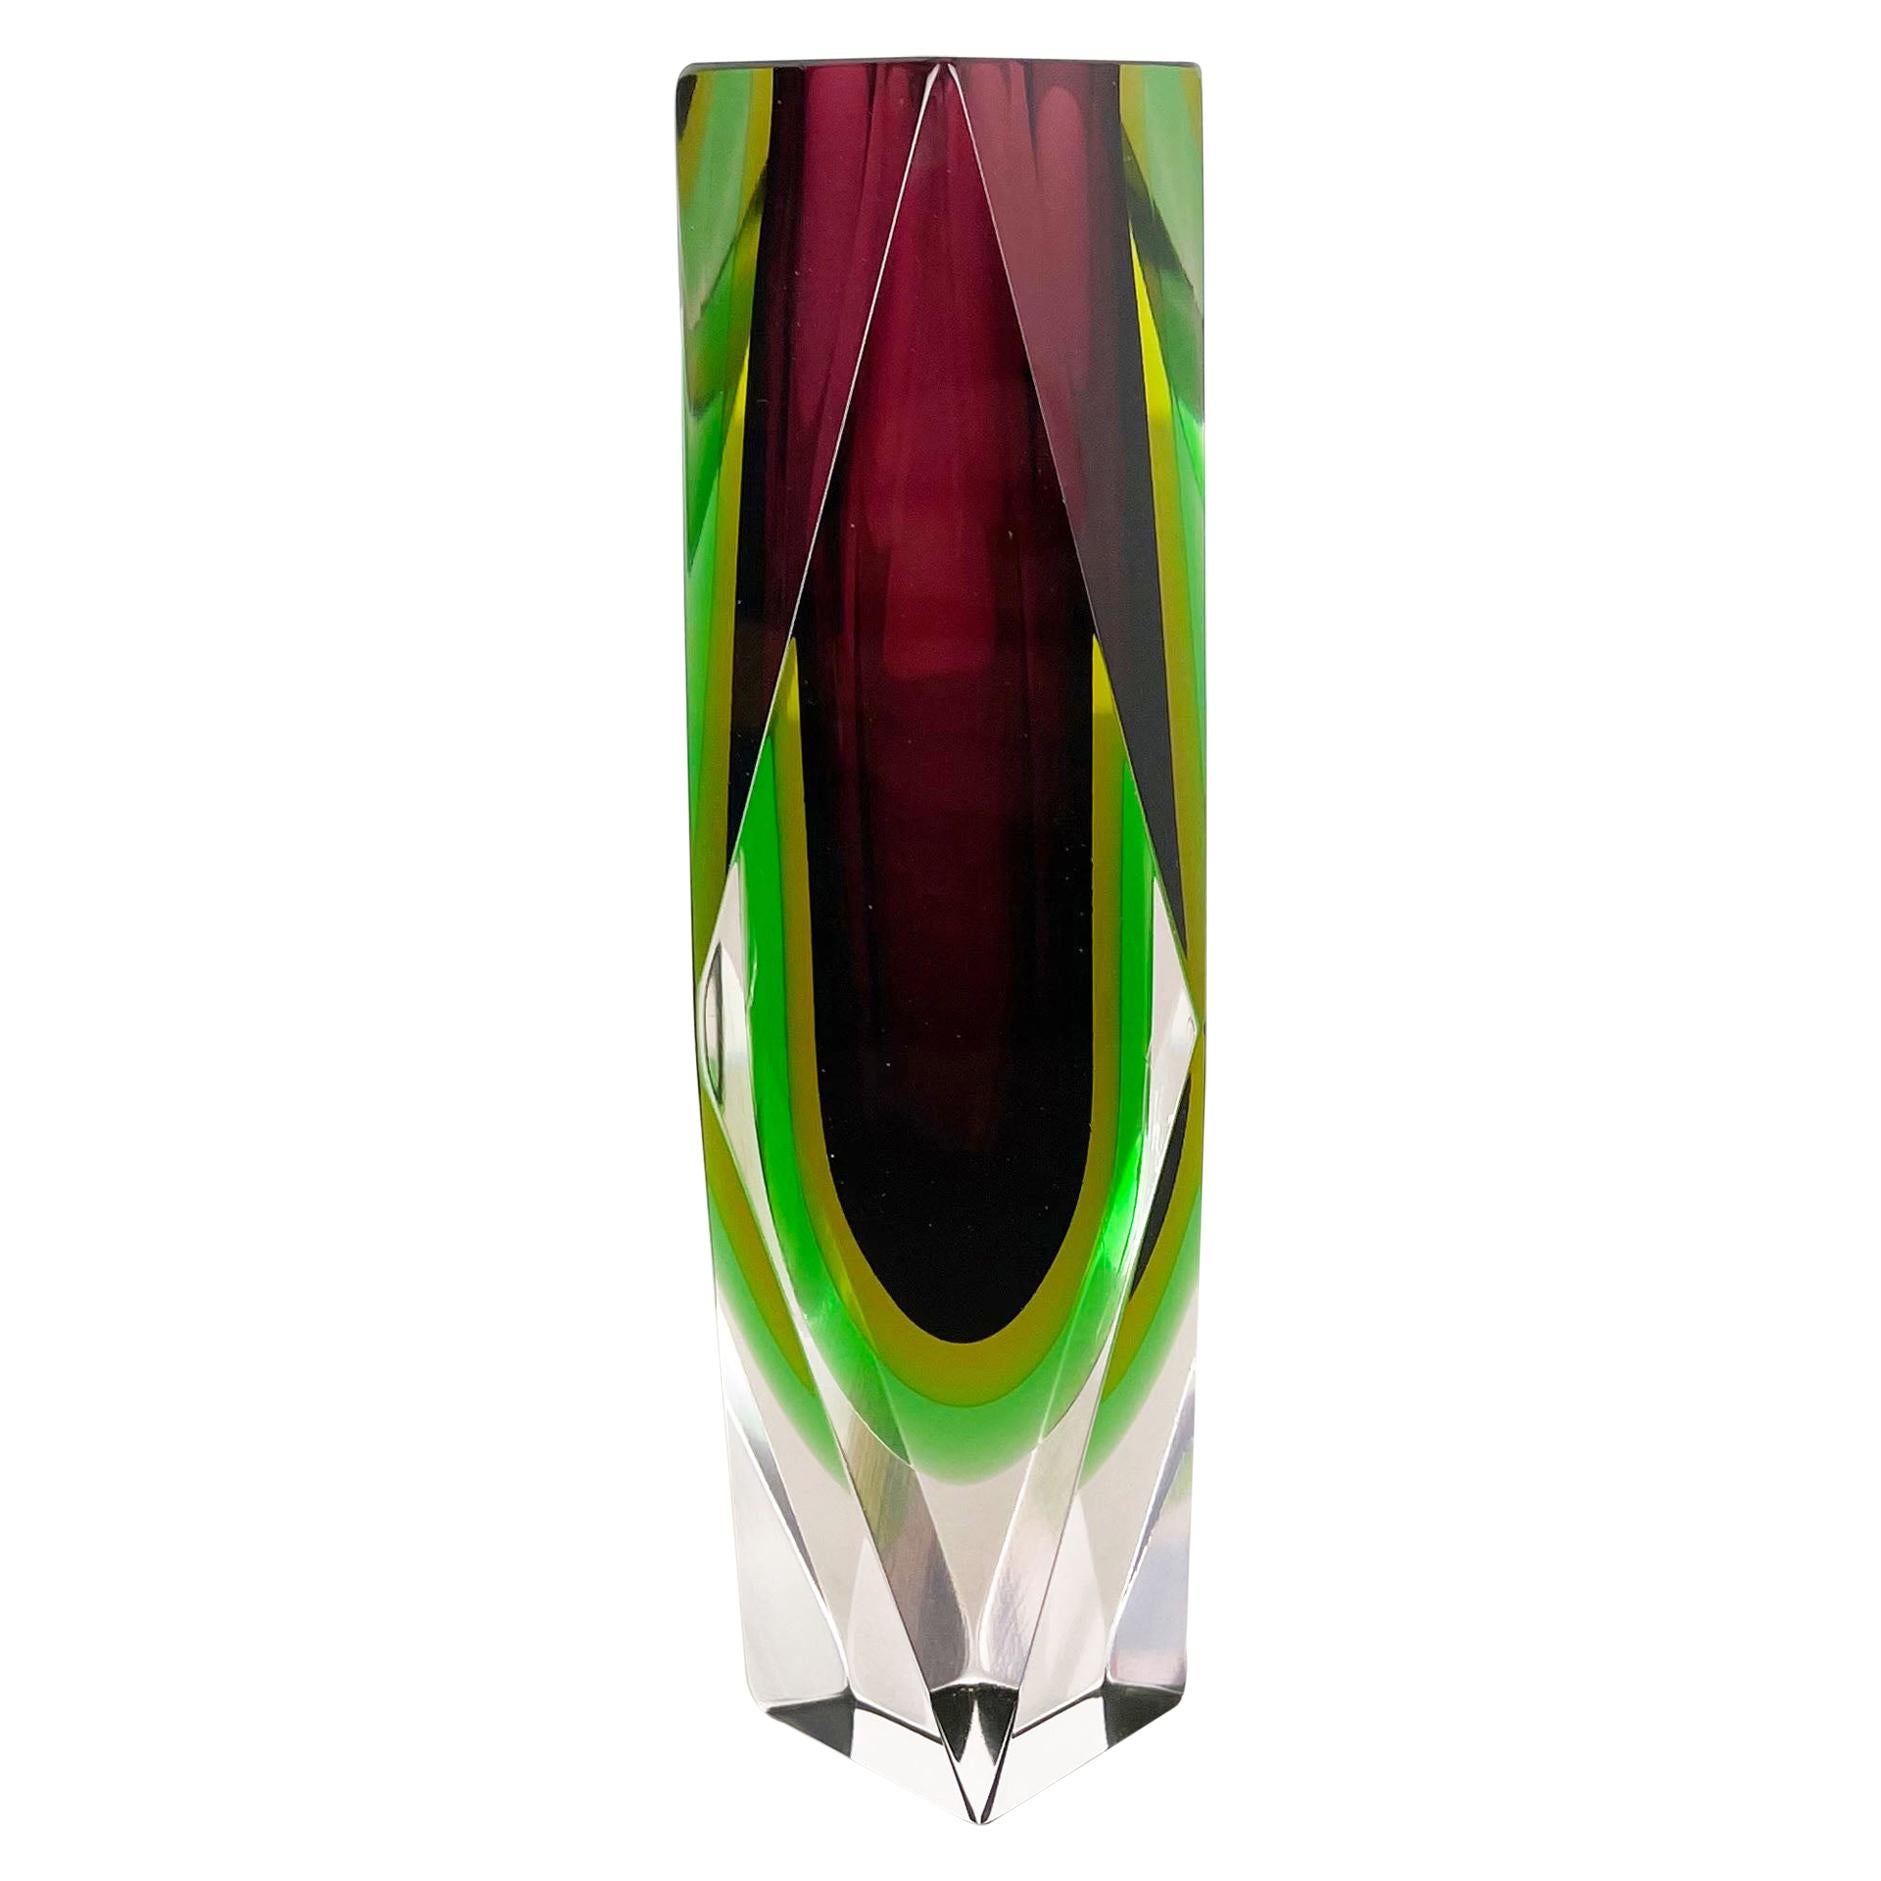 Heavy Large Murano Glass Sommerso 4 Colors Vase by Flavio Poli, Italy, 1970s